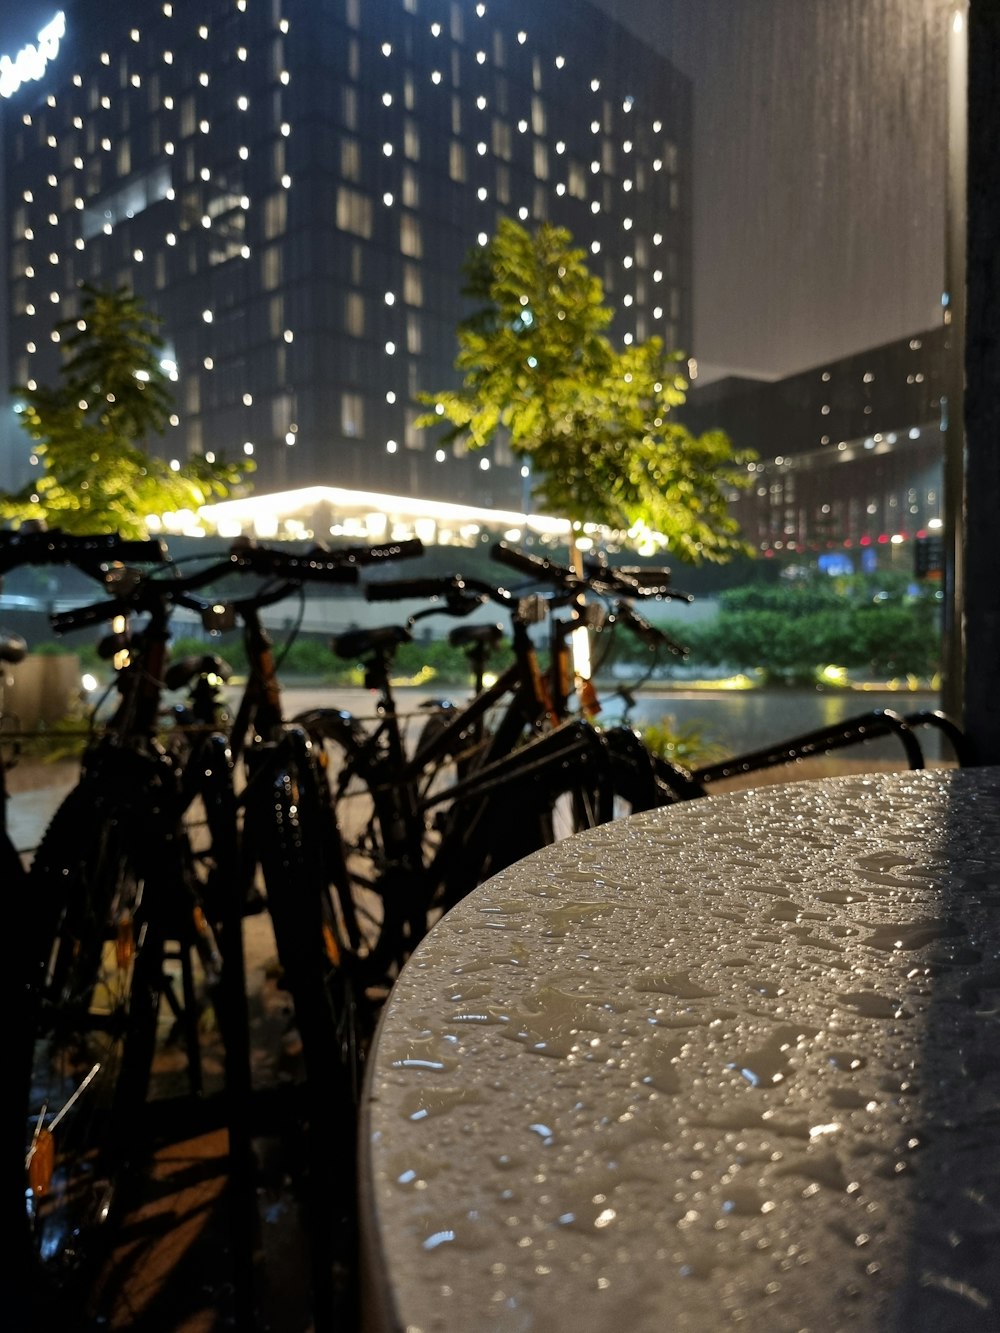 a table and some bikes in a city at night